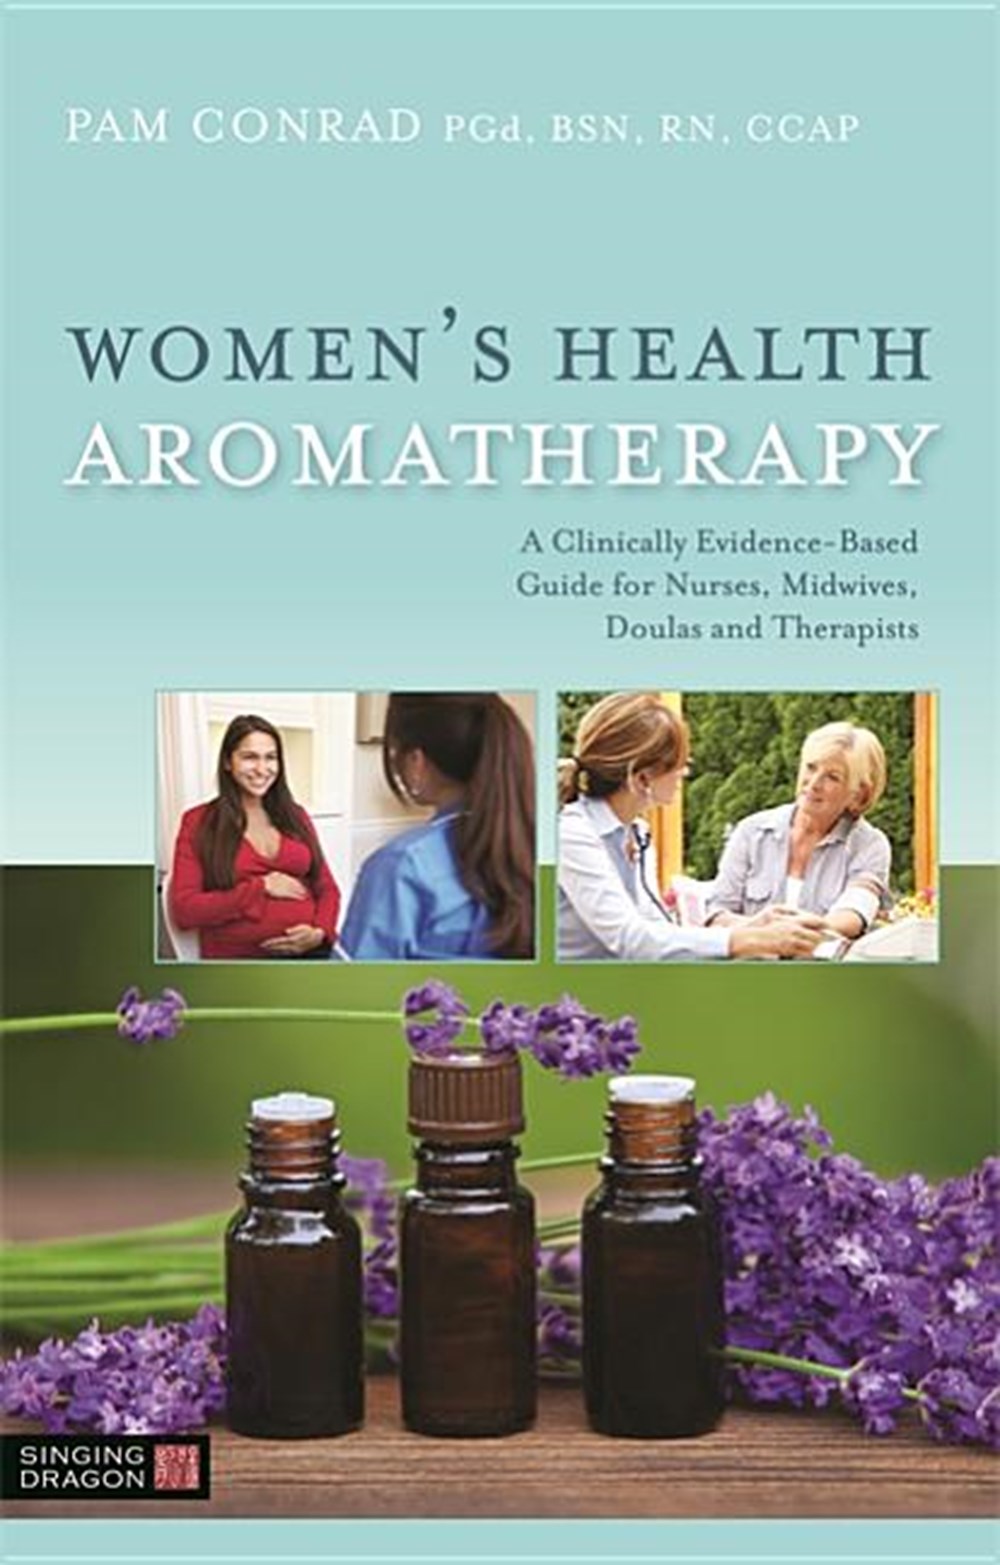 Women's Health Aromatherapy: A Clinically Evidence-Based Guide for Nurses, Midwives, Doulas and Ther